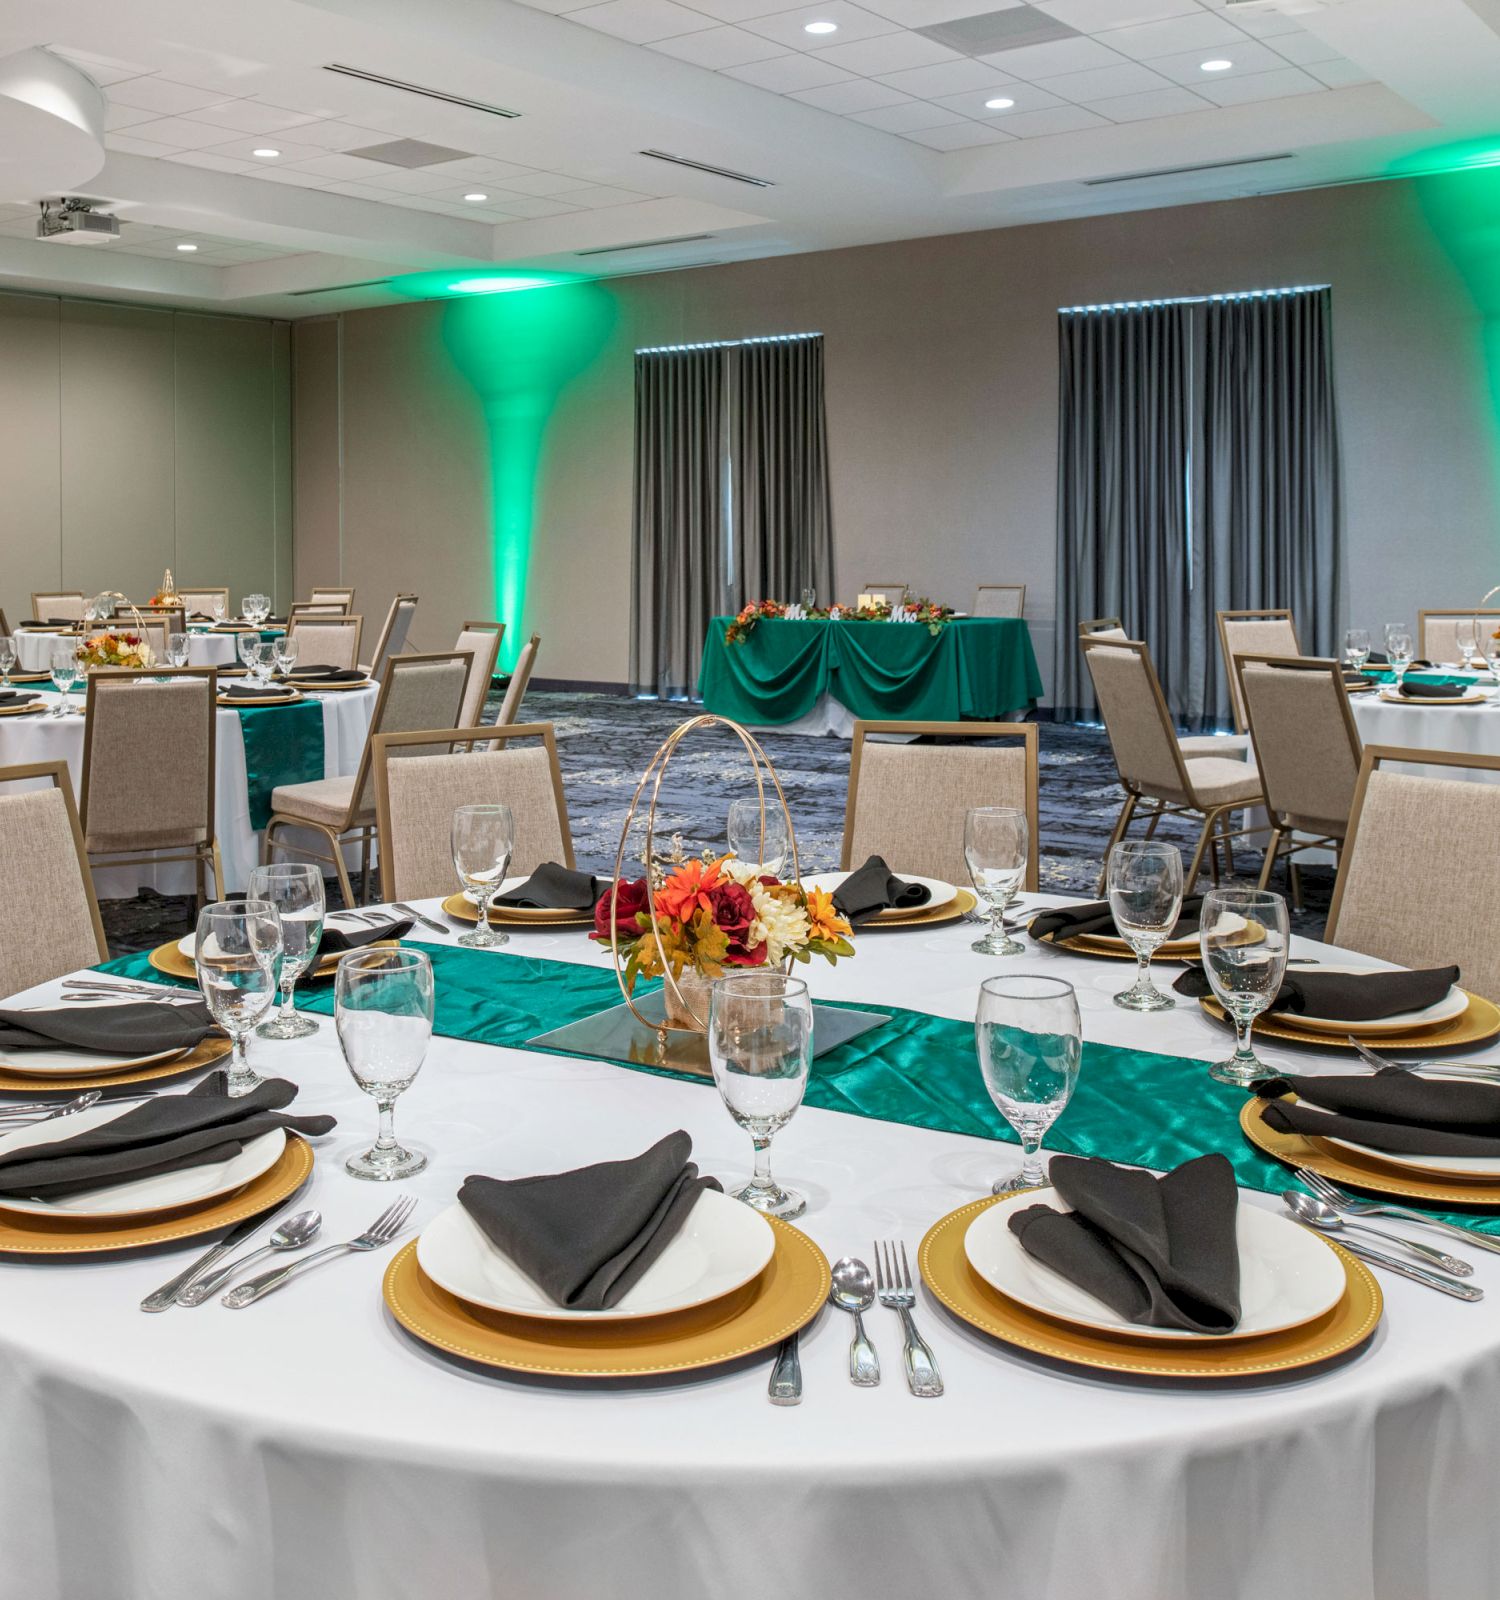 A banquet hall with round tables set with plates, glasses, cutlery, and black napkins on gold chargers, with green accents and centerpiece flowers.